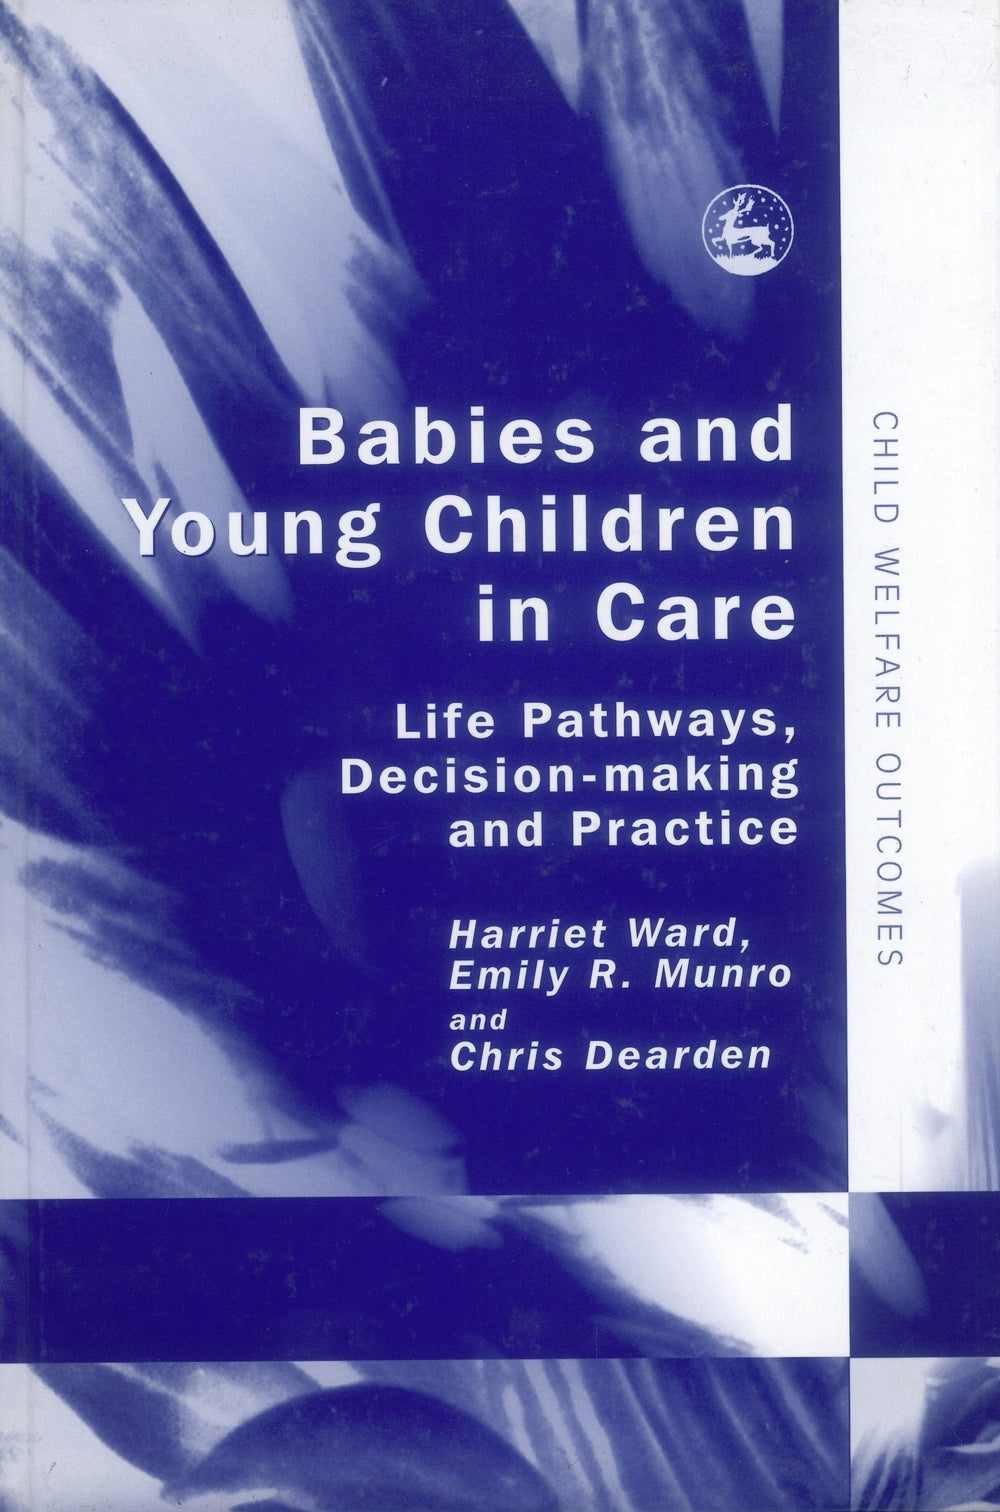 Babies and Young Children in Care by Chris Dearden, Harriet Ward, Emily Munro